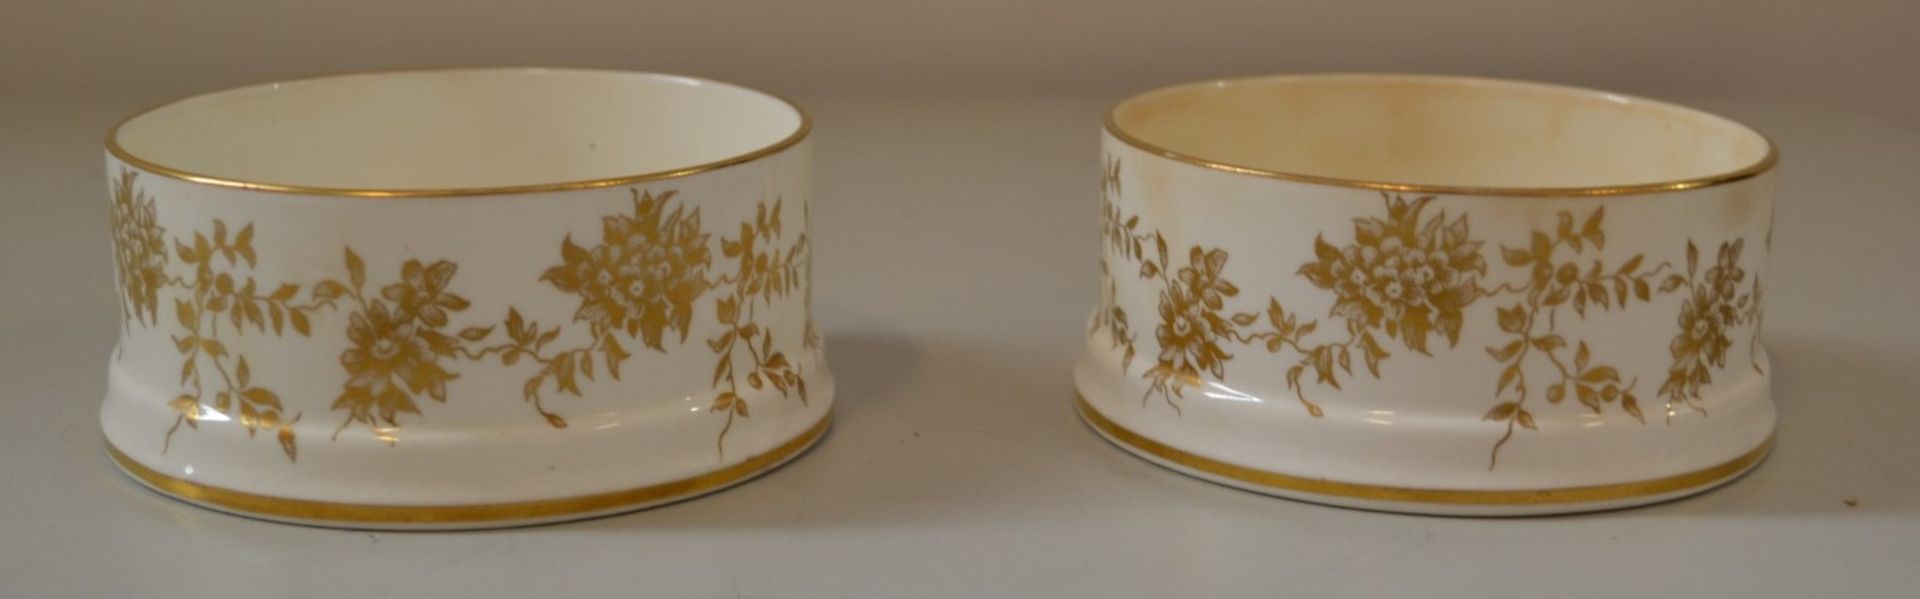 1 x Pair of Staffordshire Bone China Pots - Ref J2155 - CL314 - Image 2 of 3